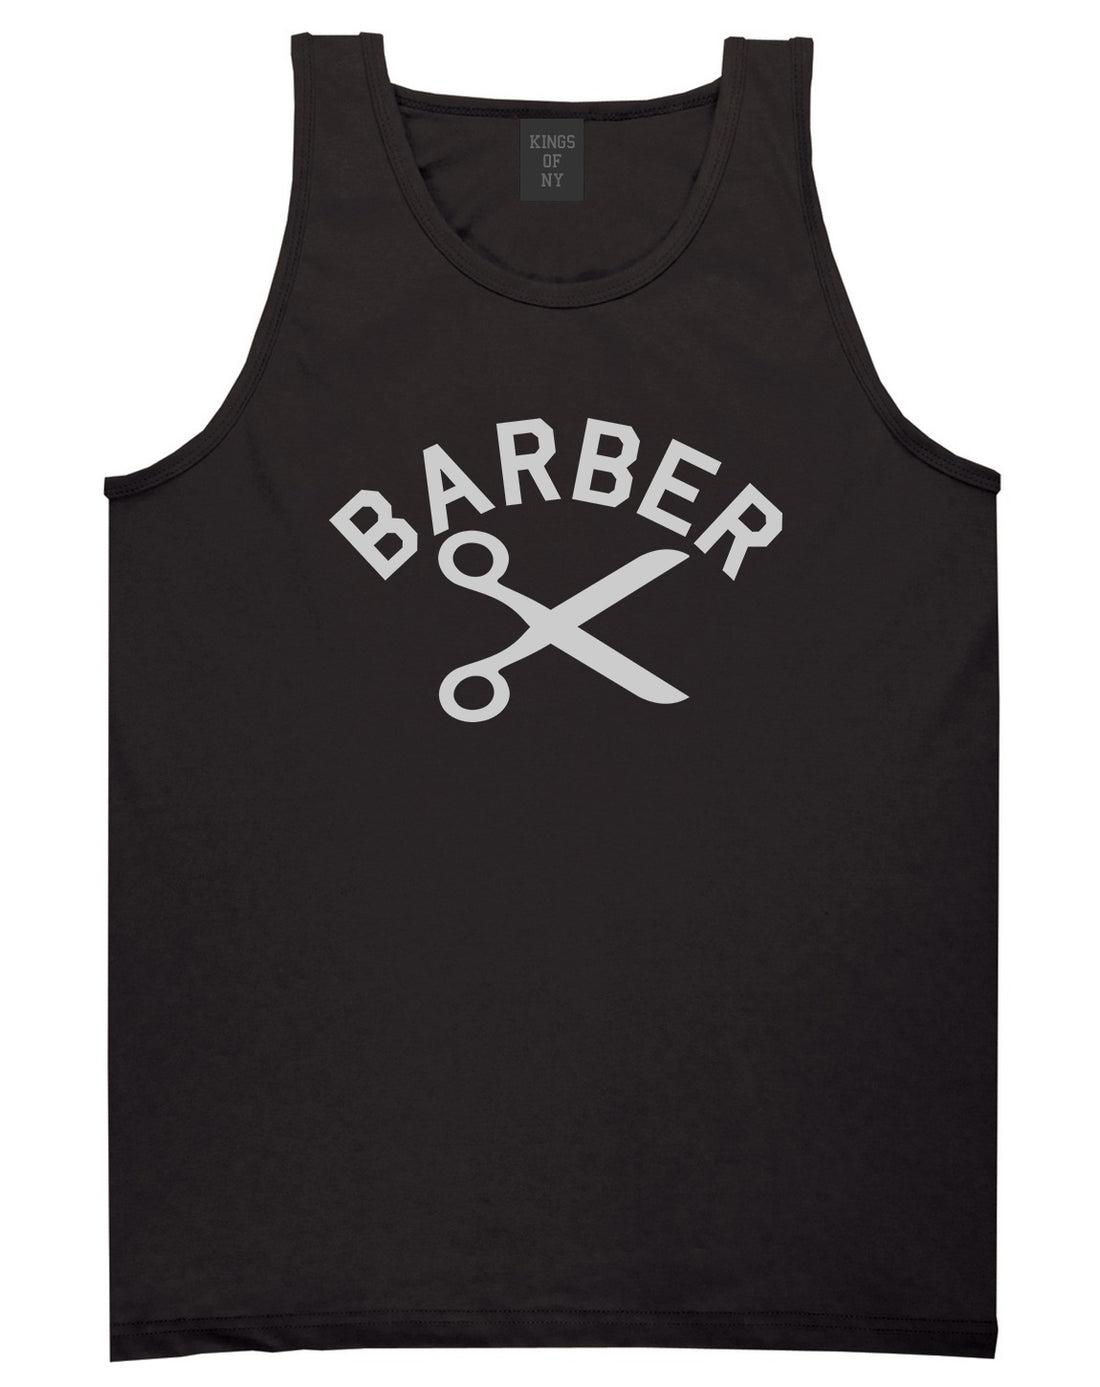 Barber Scissors Black Tank Top Shirt by Kings Of NY